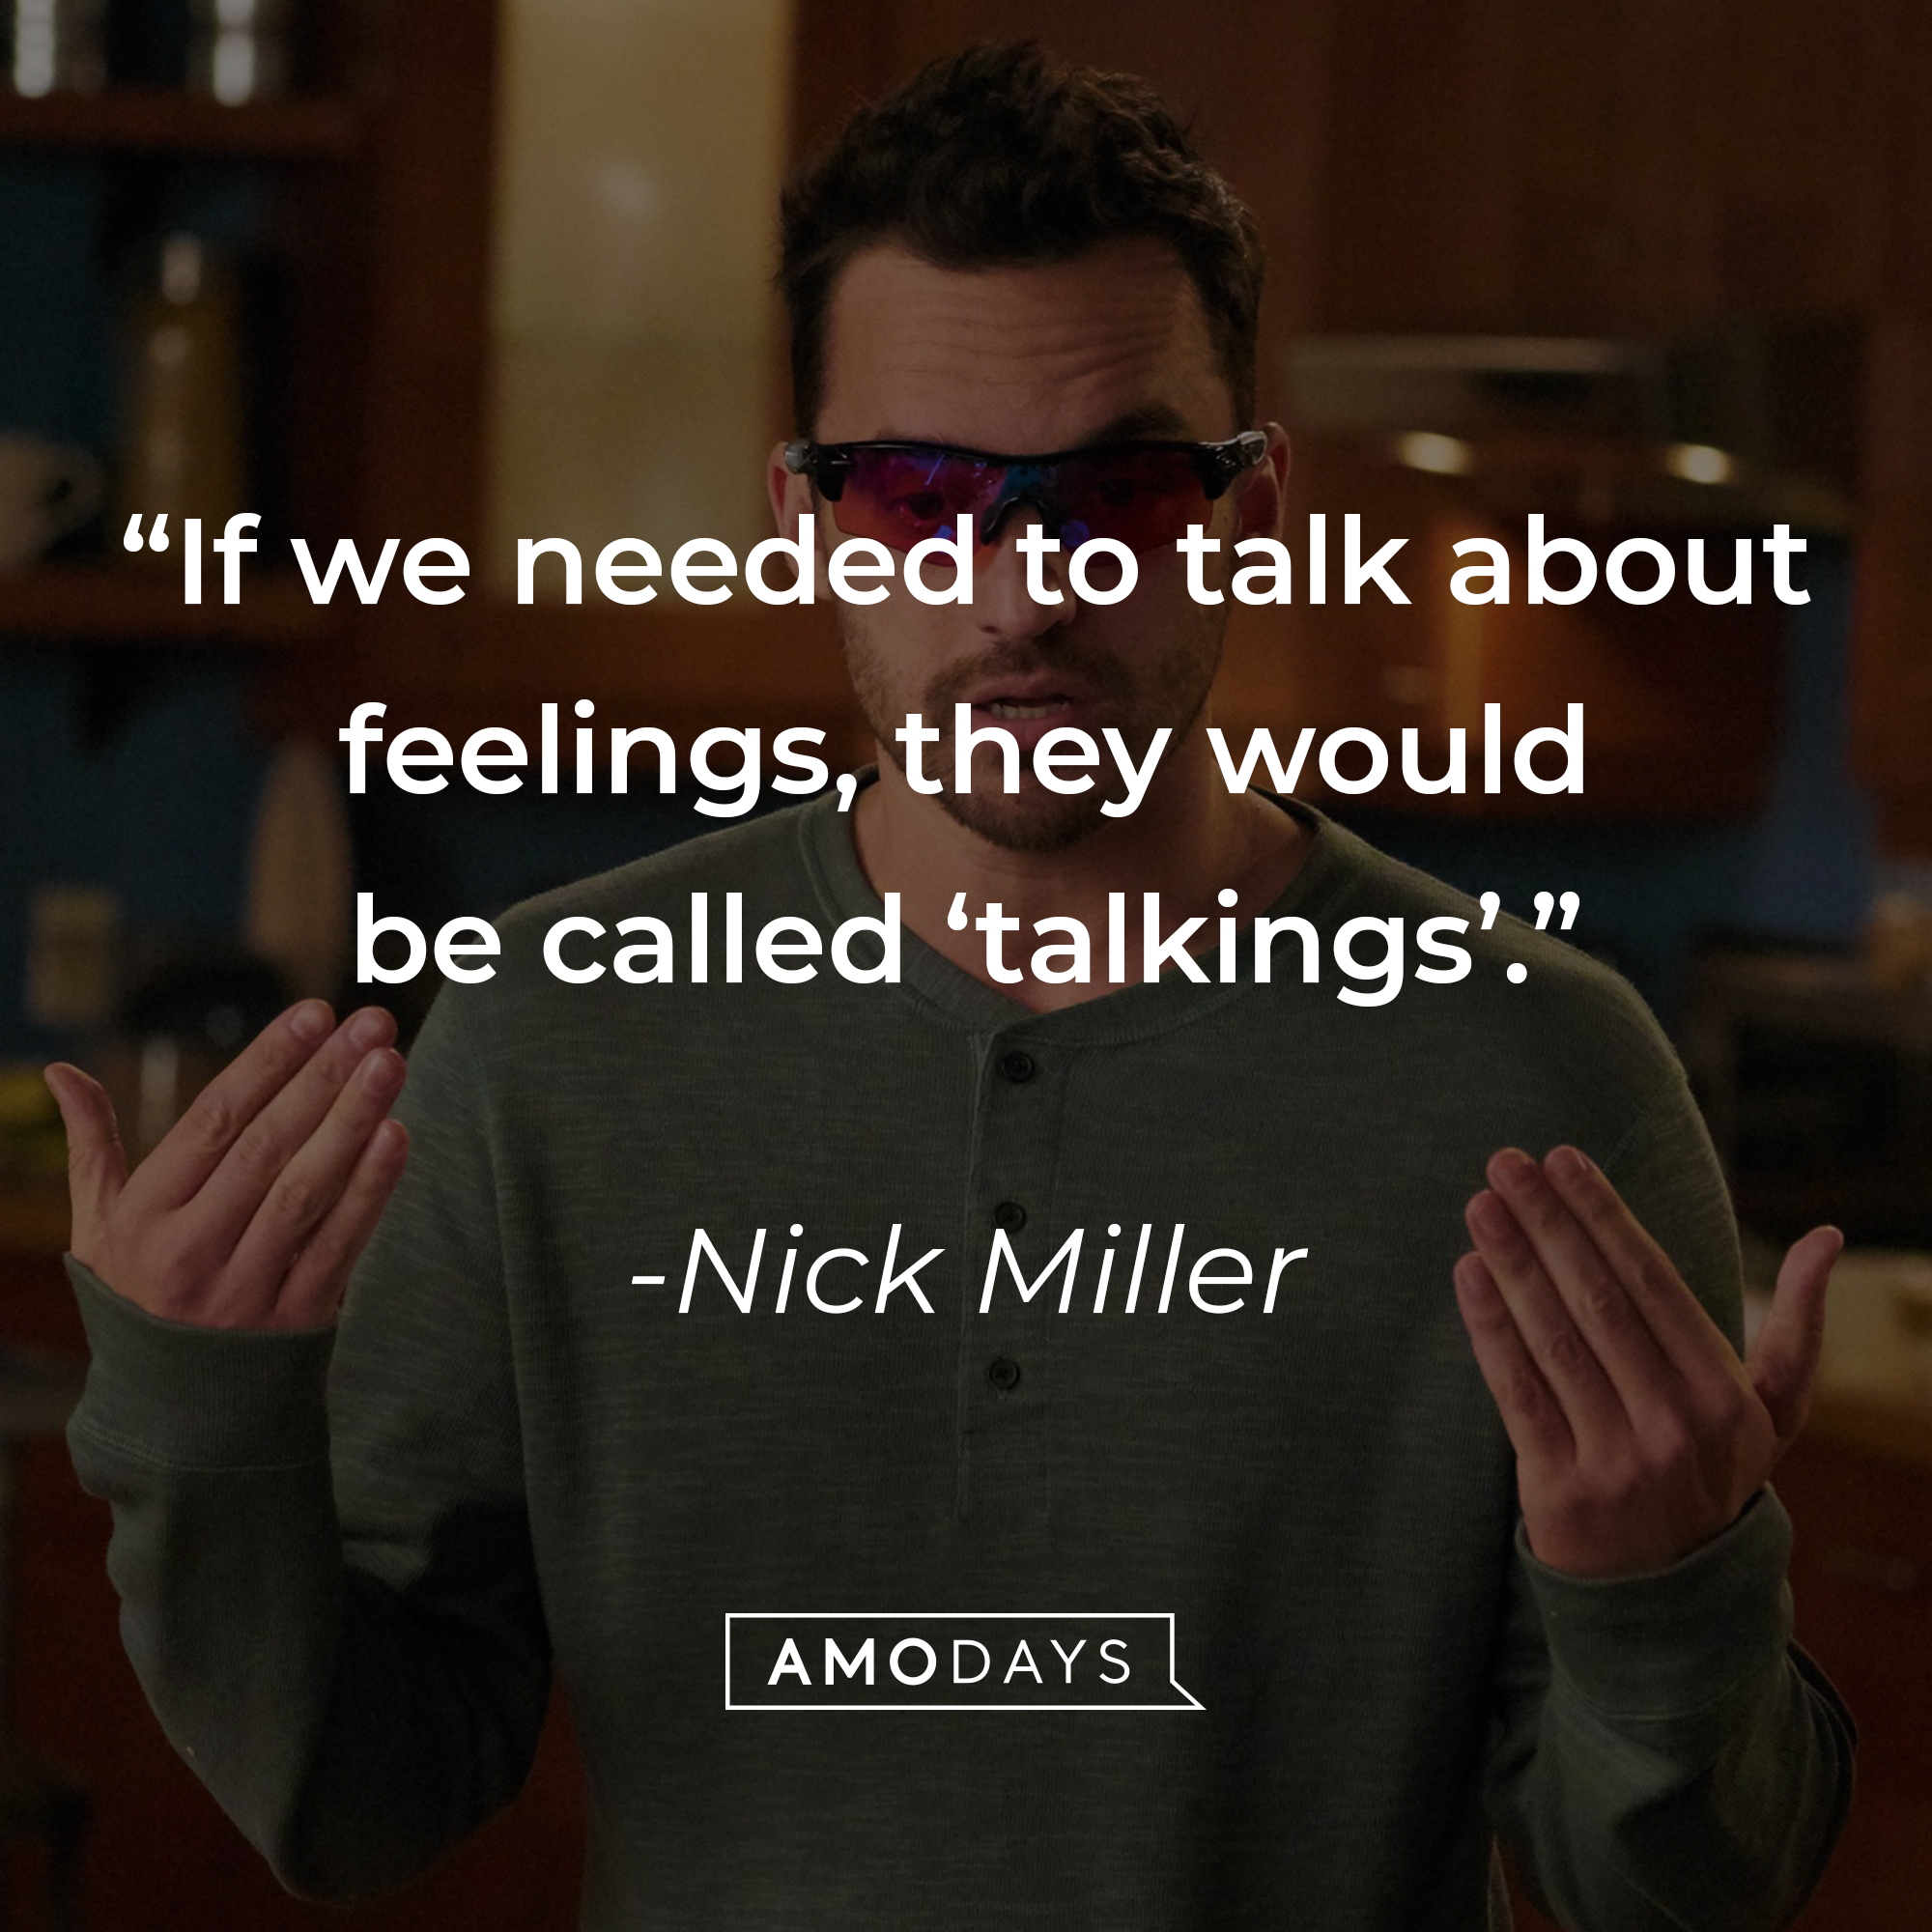 Nick Miller, with his quote: “If we needed to talk about feelings, they would be called ‘talkings.’” | Source: facebook.com/OfficialNewGirl